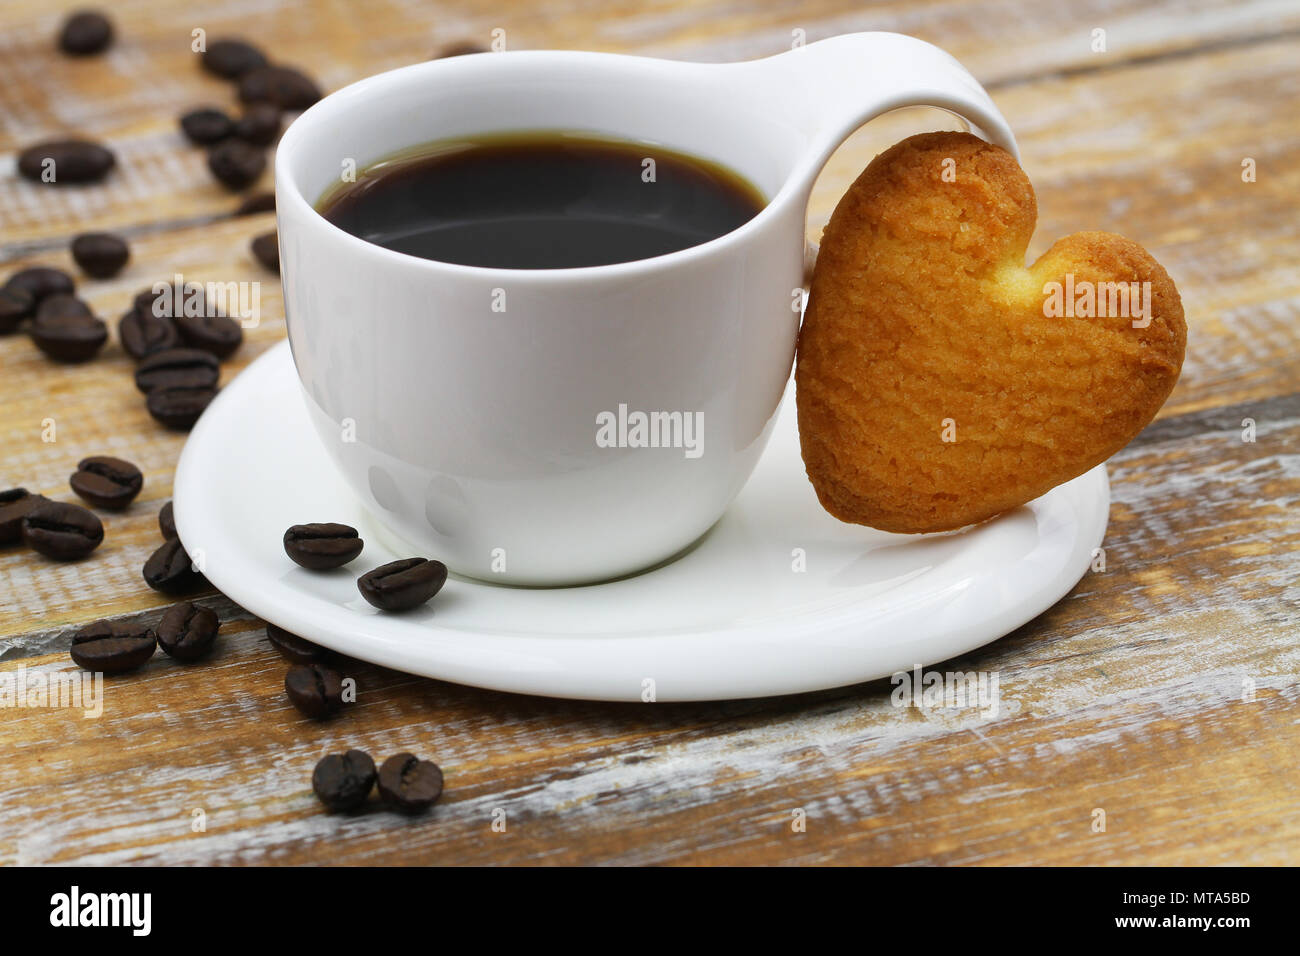 Heart shaped cookie leaning against white cup of coffee on rustic wooden surface Stock Photo